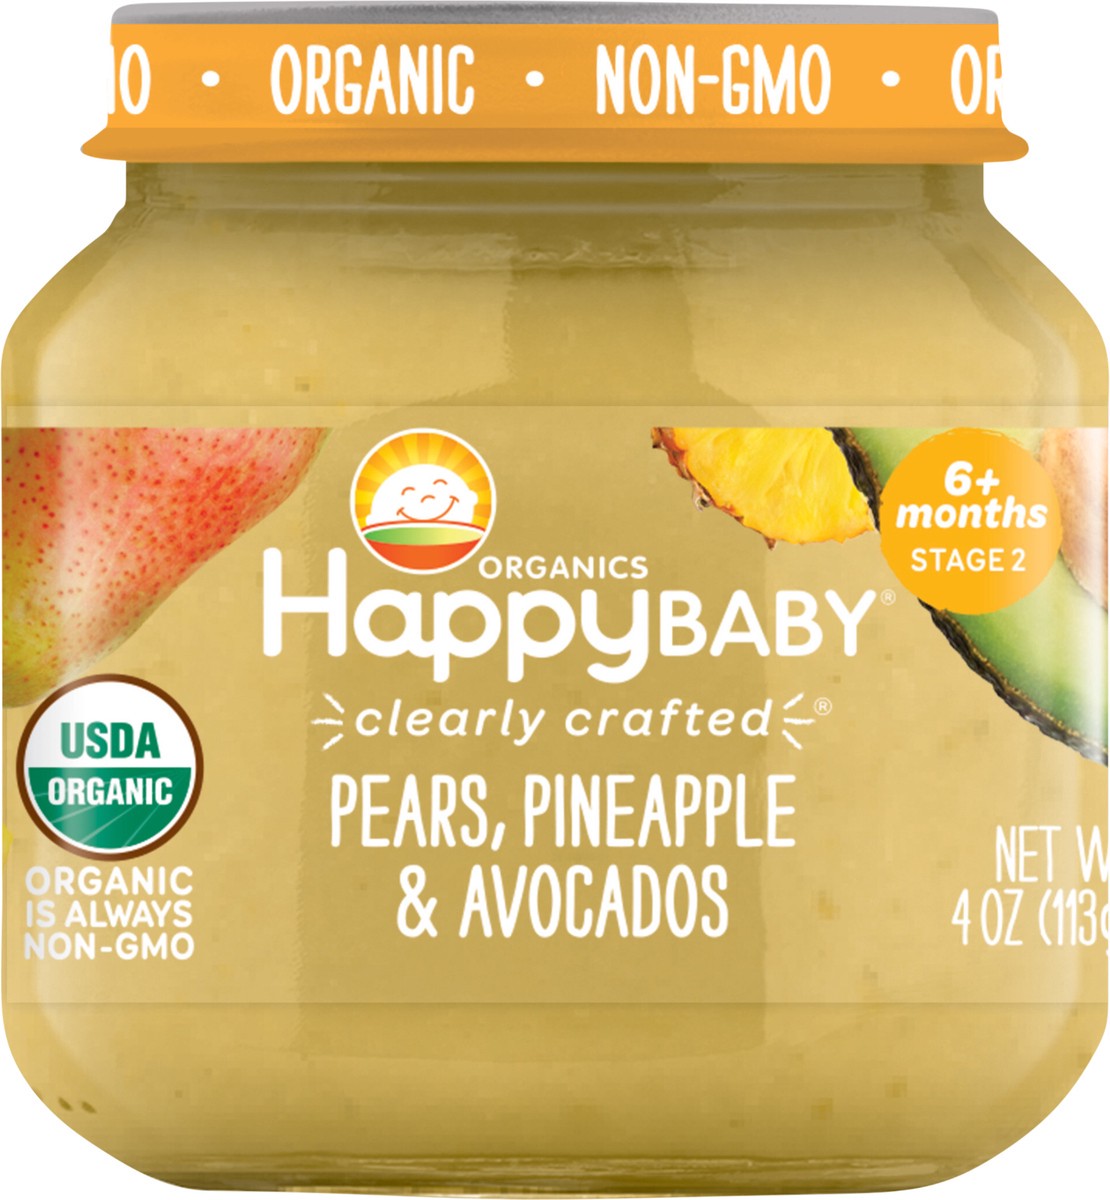 slide 3 of 3, Happy Baby Organics Clearly Crafted Stage 2 Pears, Pineapple & Avocados Jar 4 oz UNIT, 4 oz